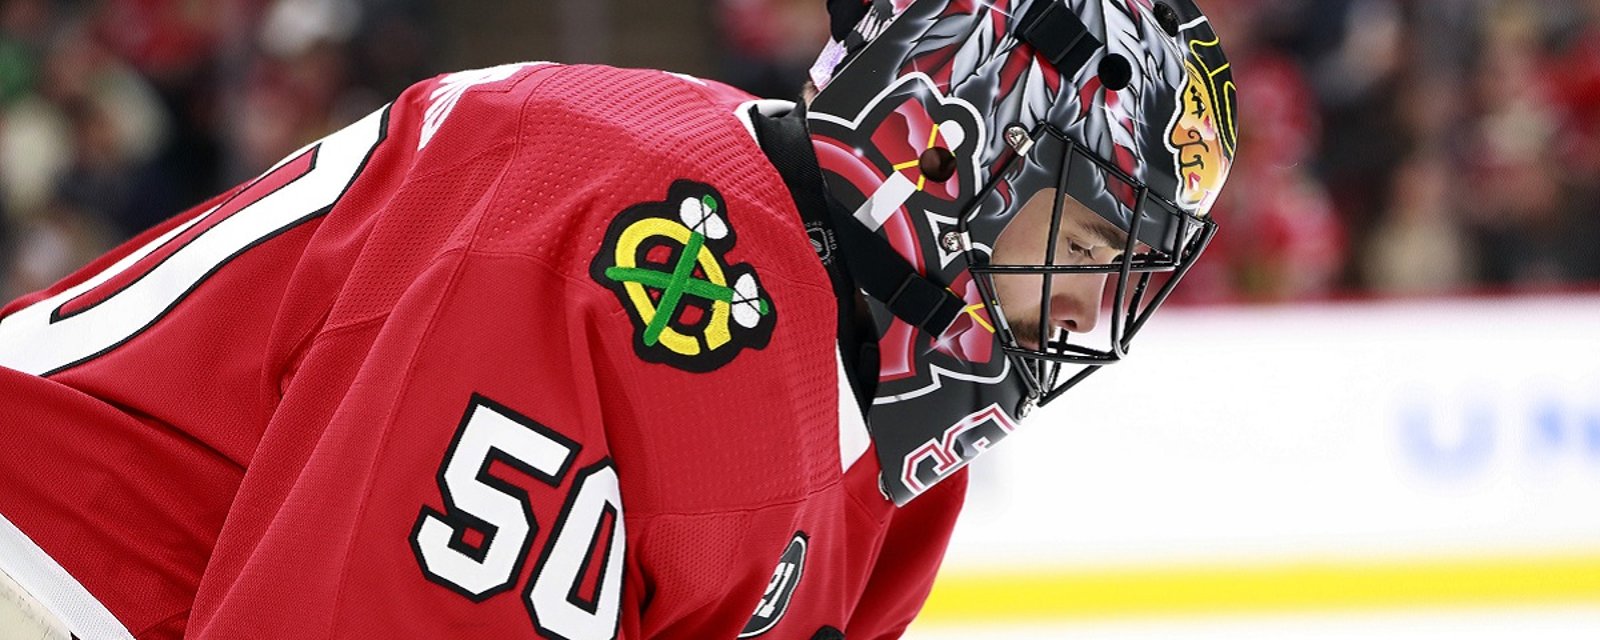 Corey Crawford has officially retired.